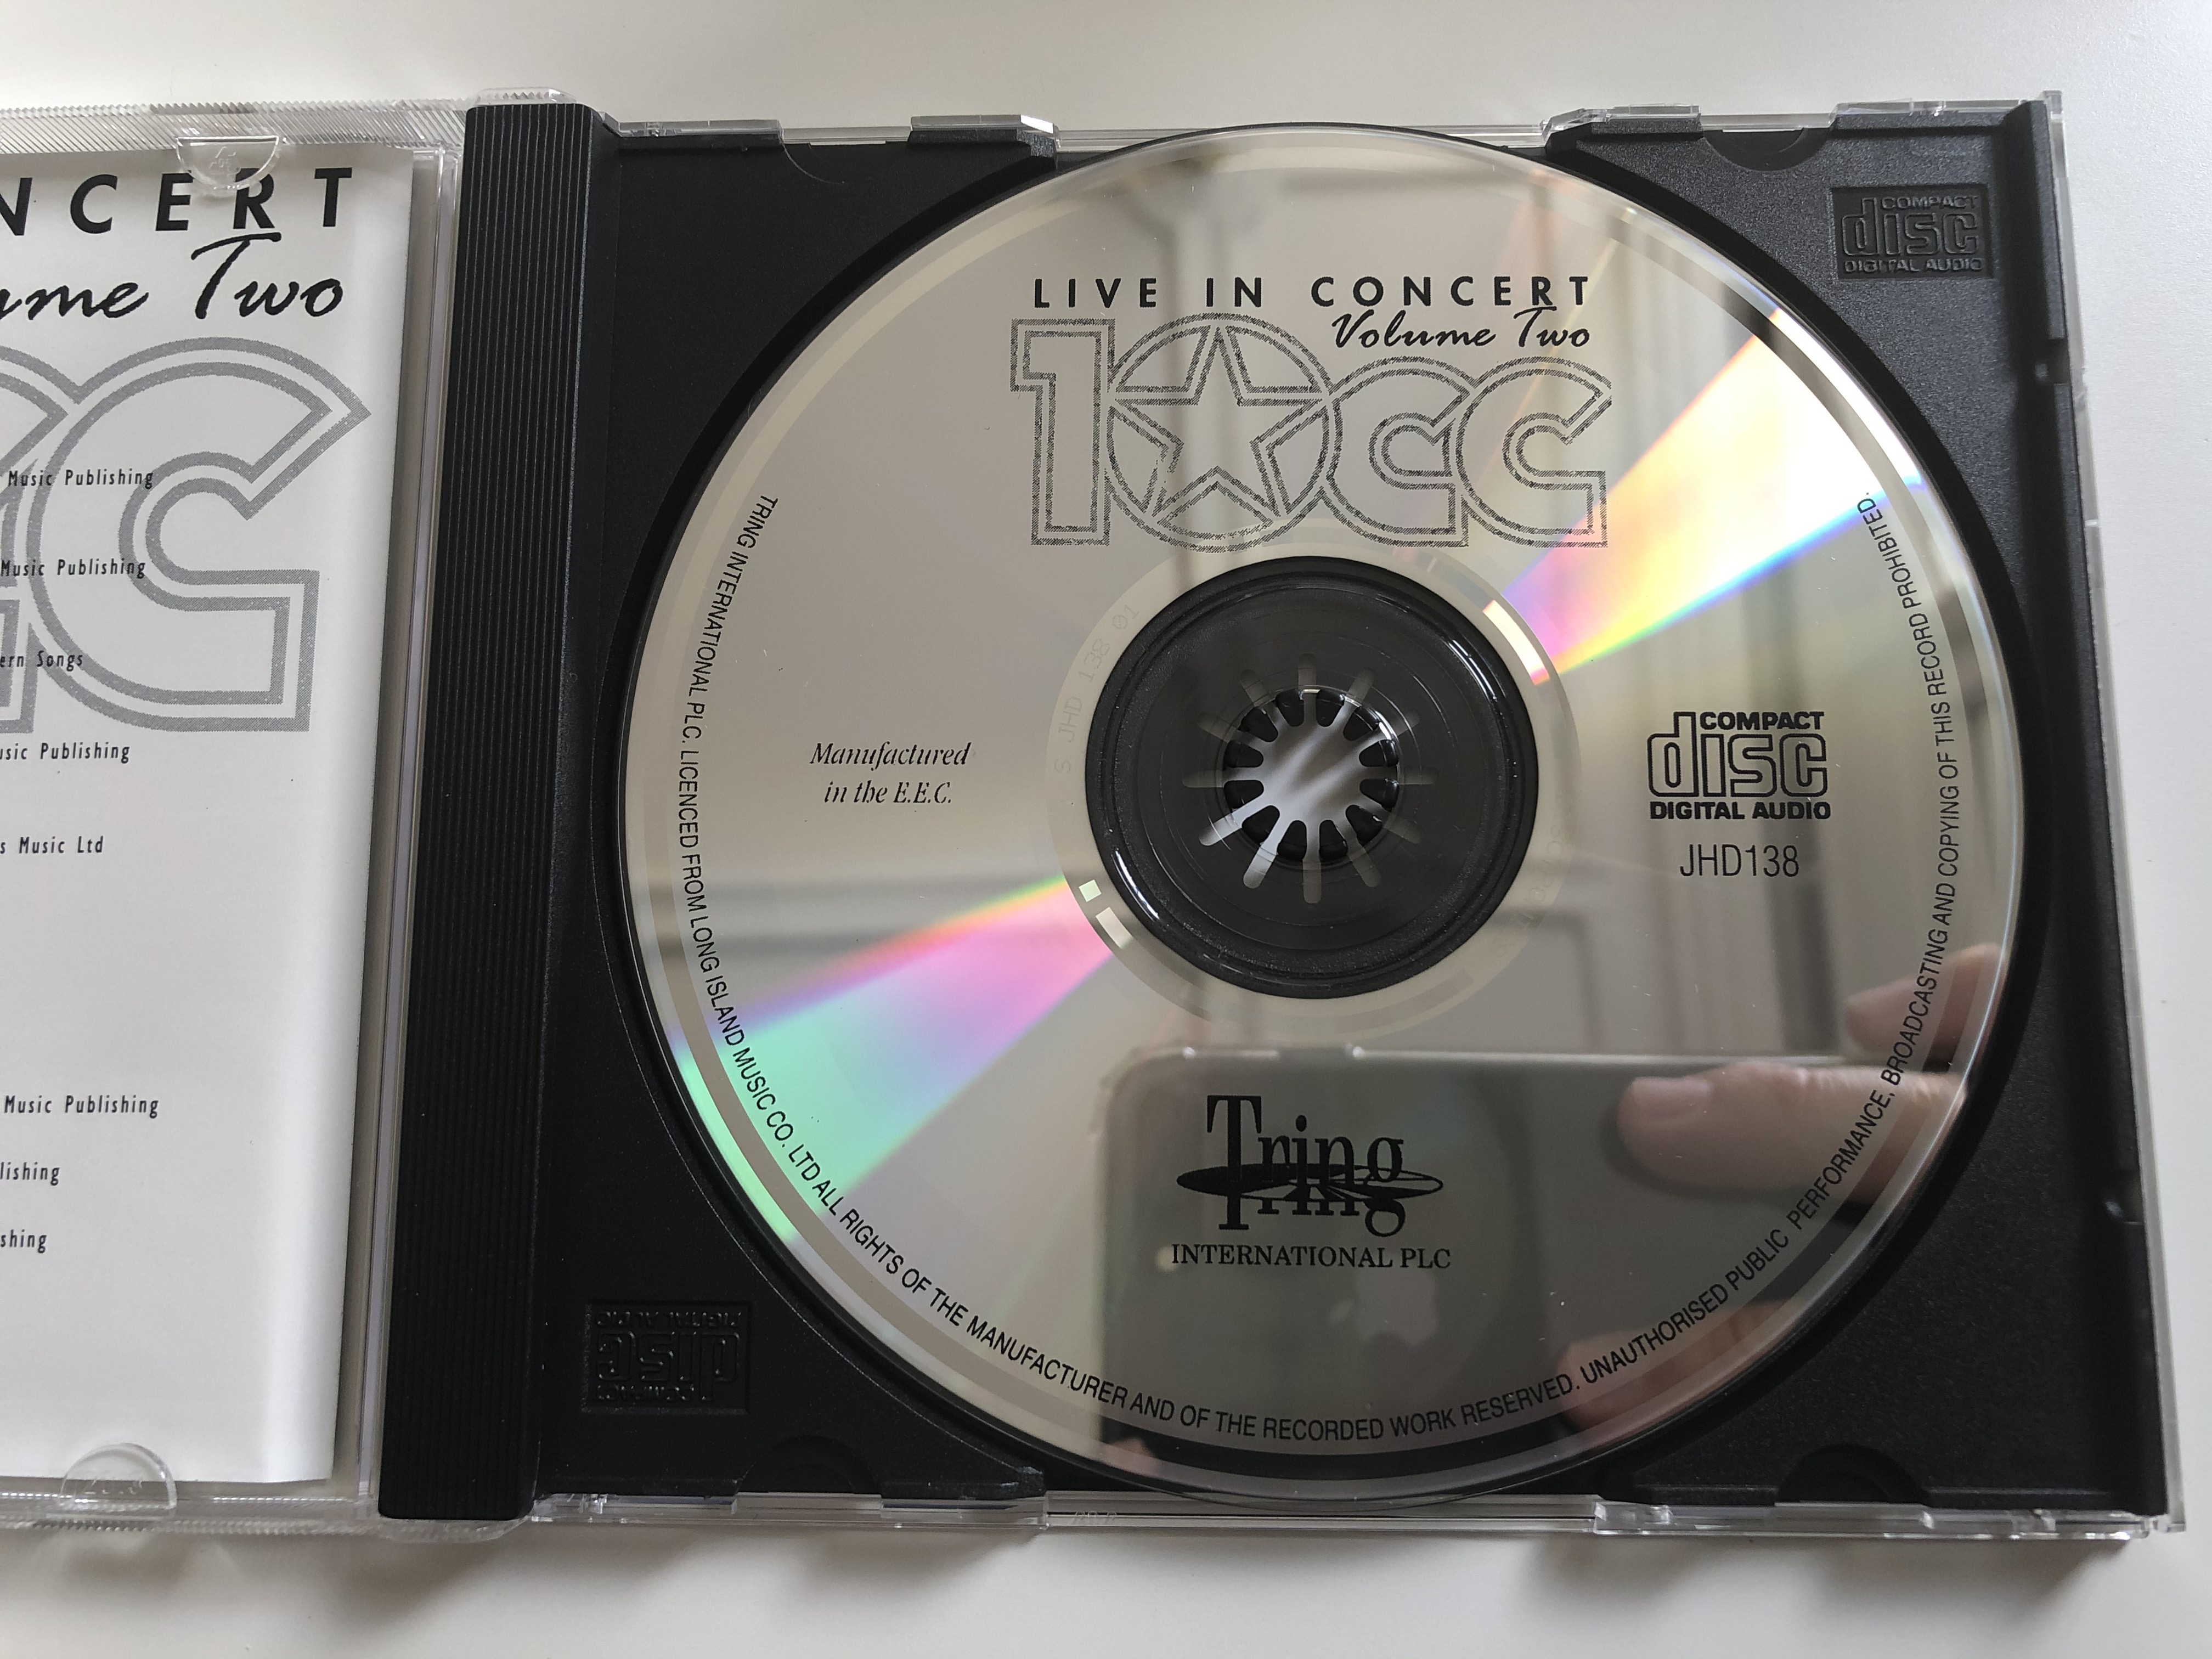 live-in-concert-volume-two-10cc-tring-audio-cd-1993-jhd138-3-.jpg